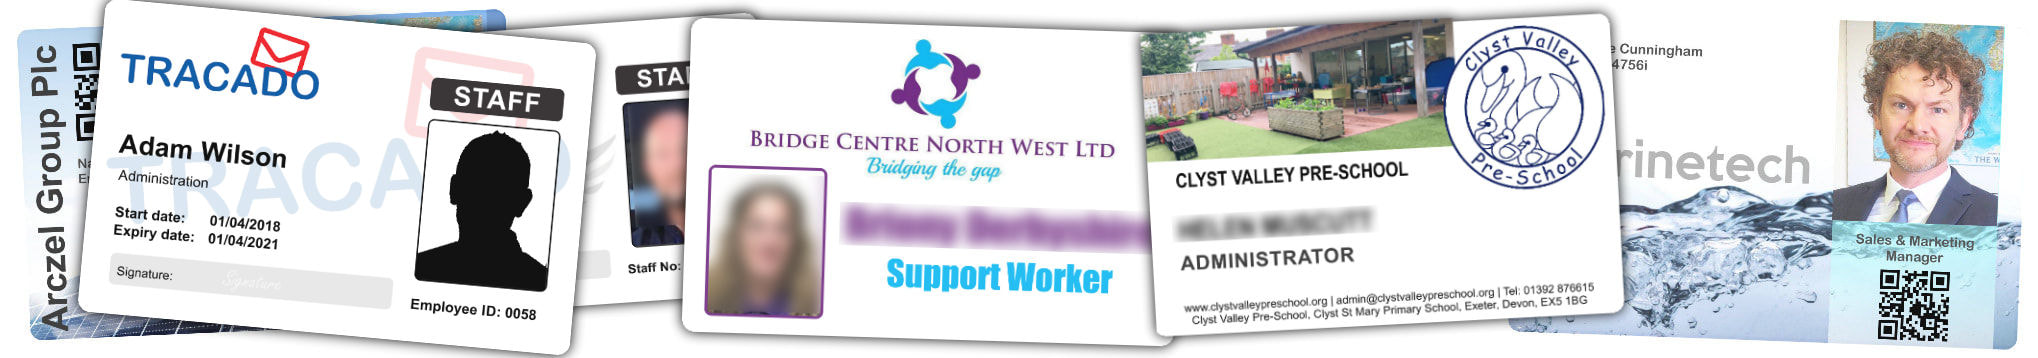 Blackburn examples of staff photo ID cards | samples of employee Identity card printing | Workers ID cards printed in 